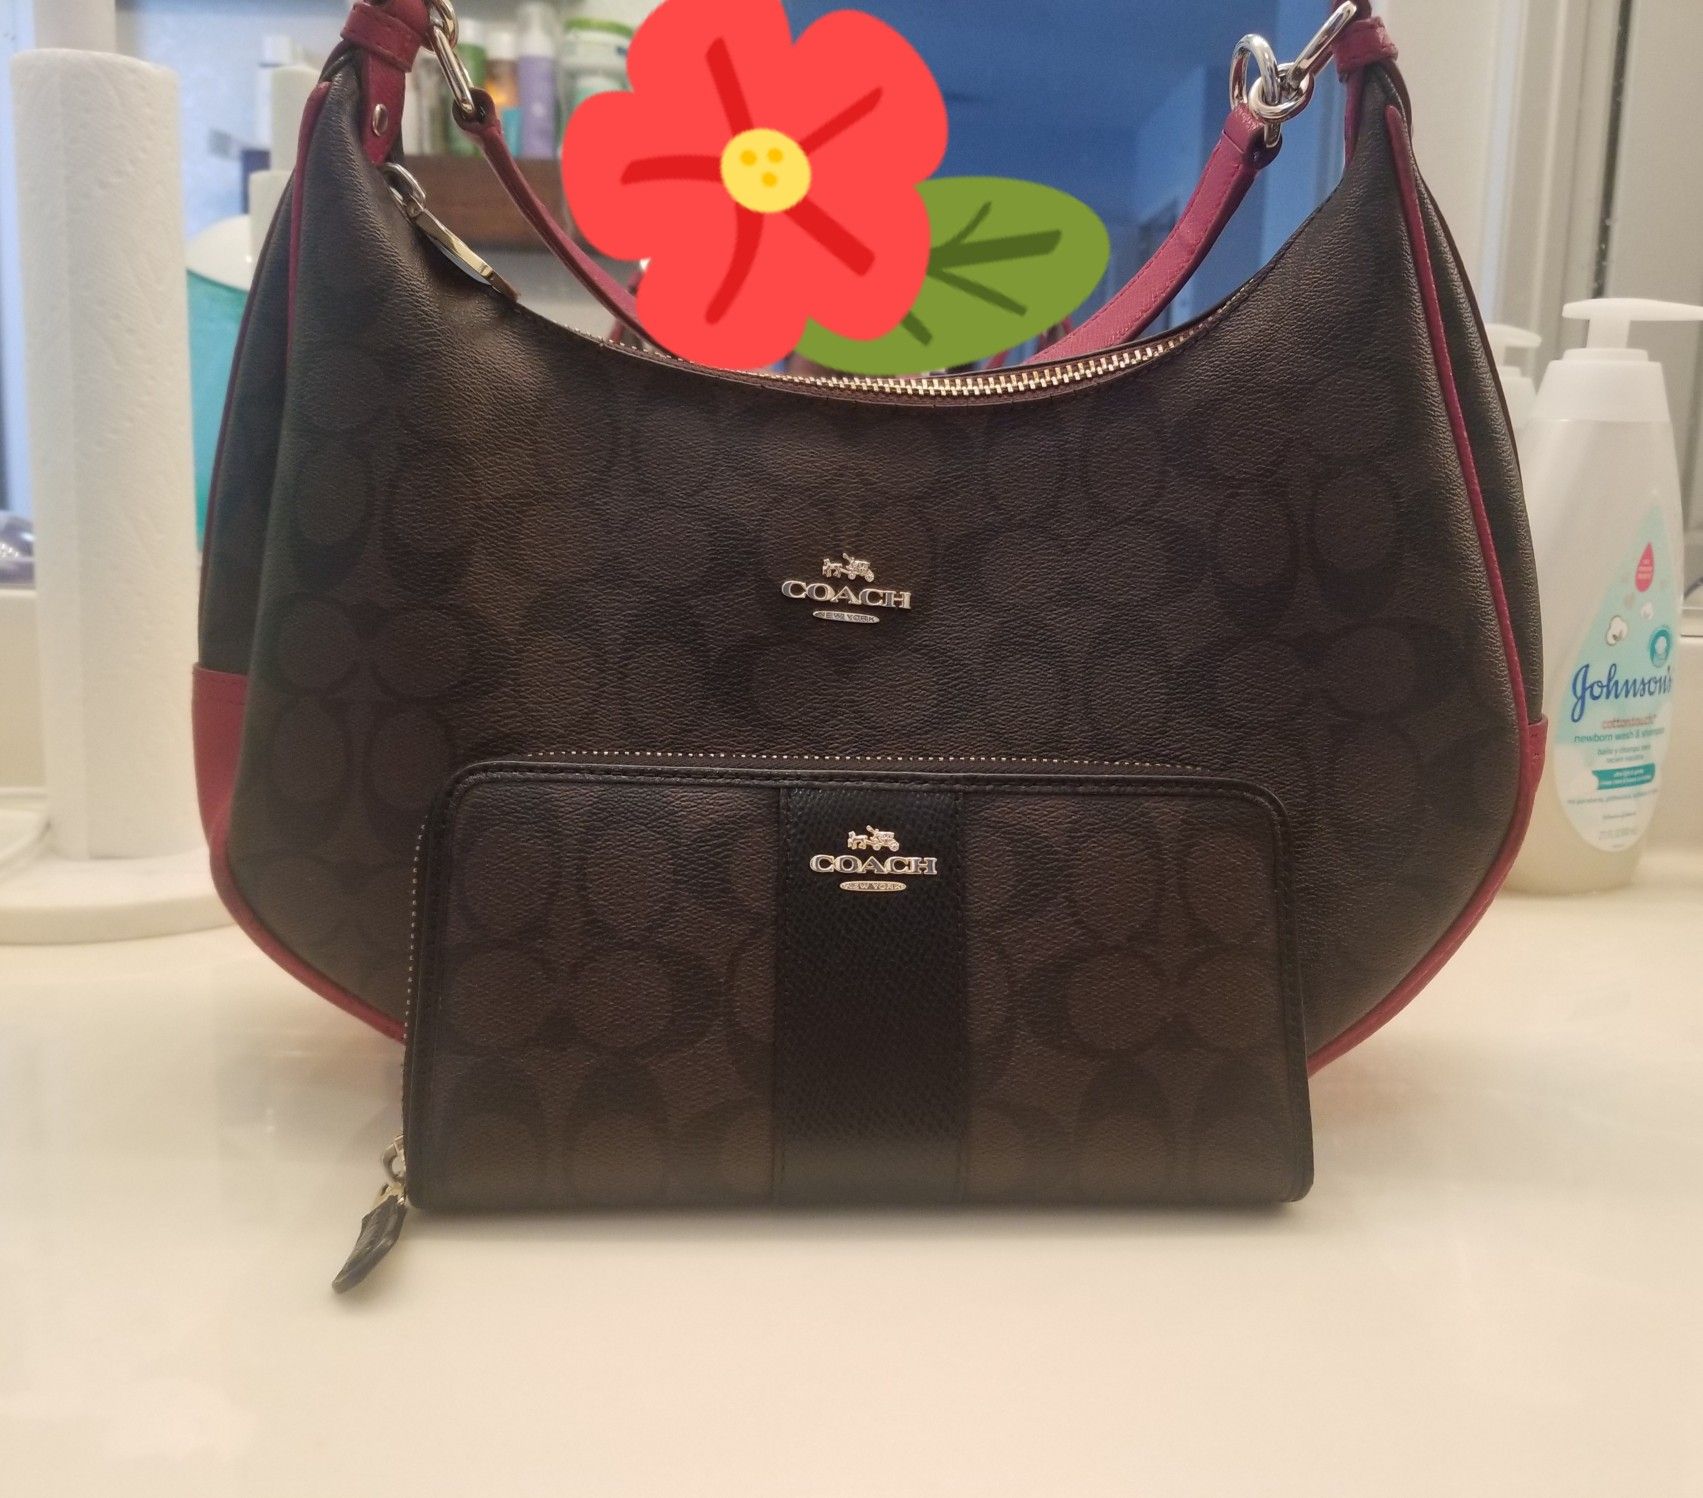 Authentic coach purse and wallet